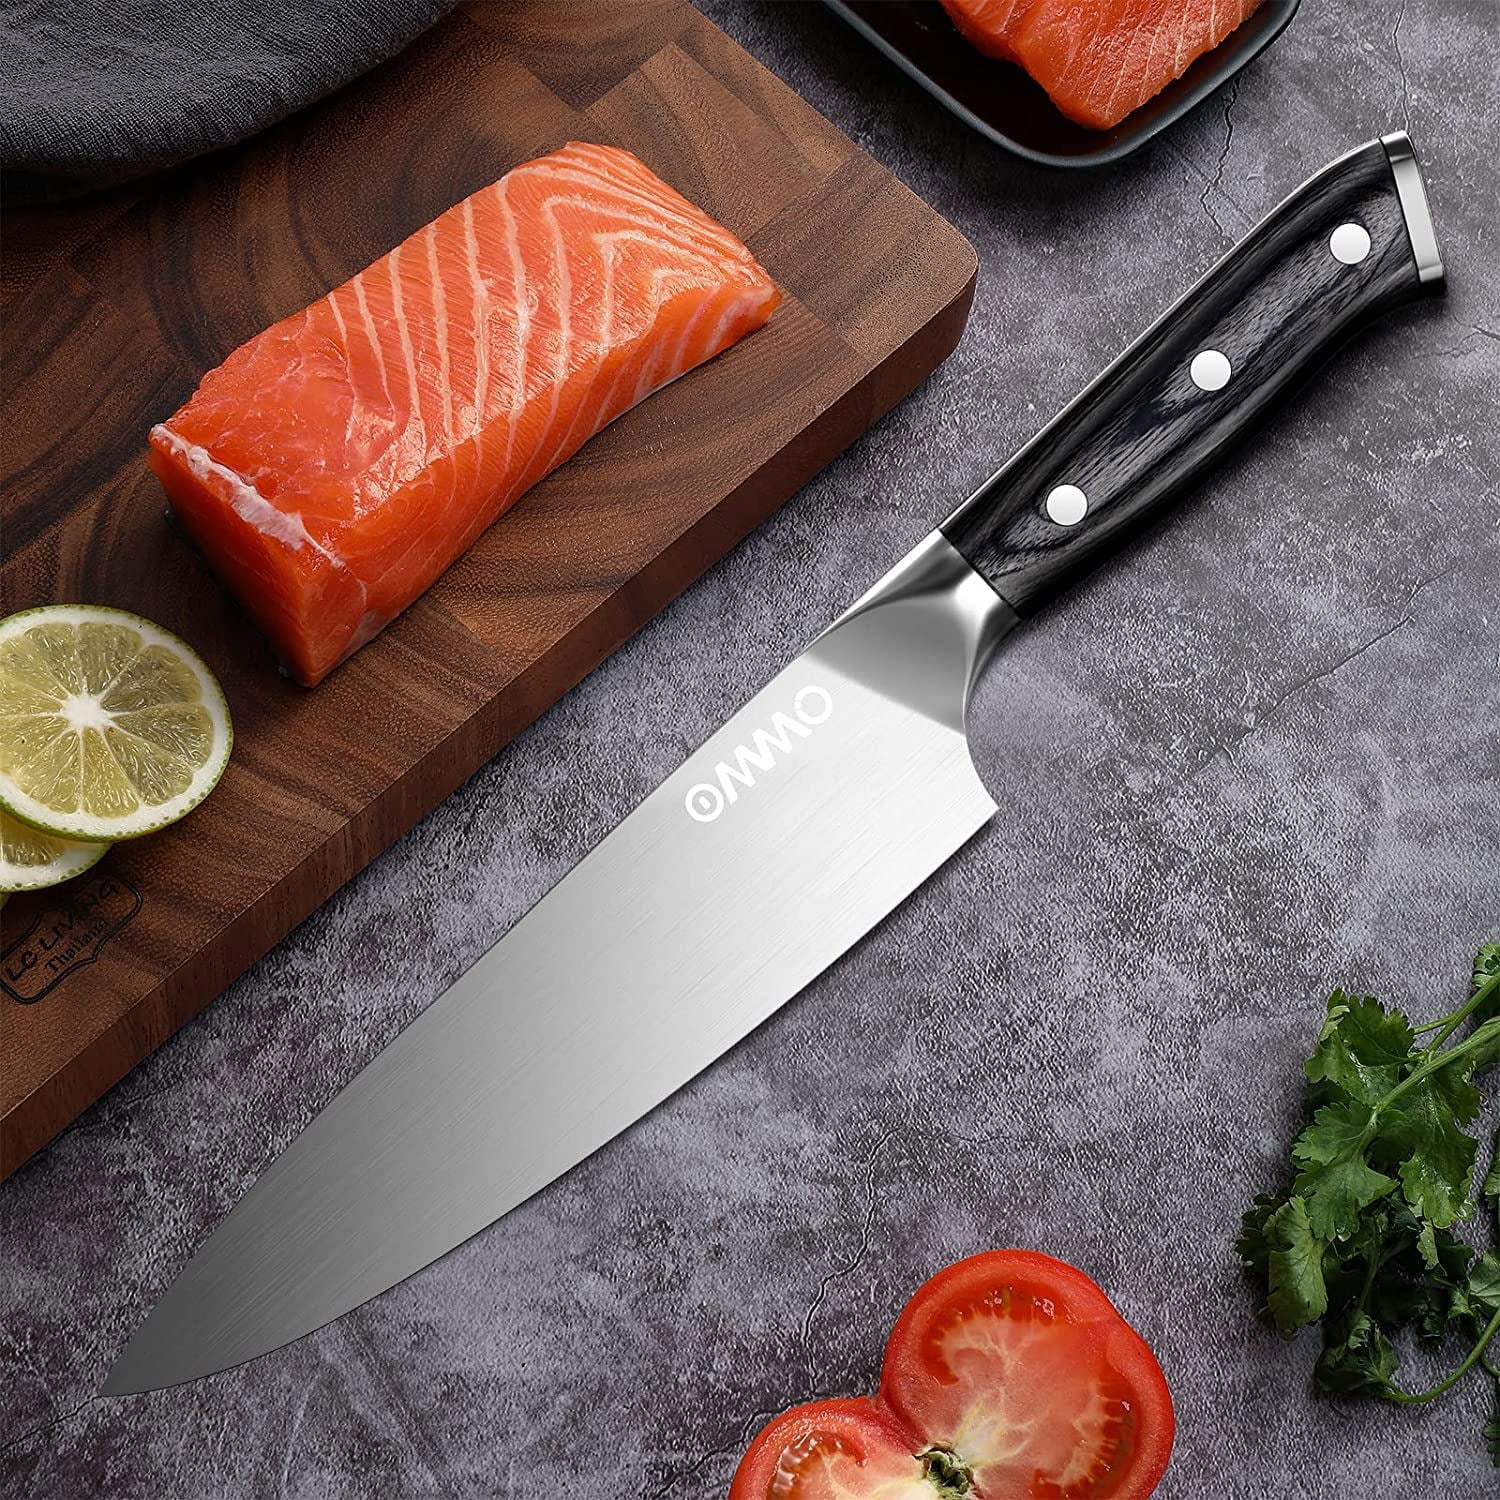 Chef Knife, OMMO 8 Inch High Carbon Stainless Steel Kitchen Knife